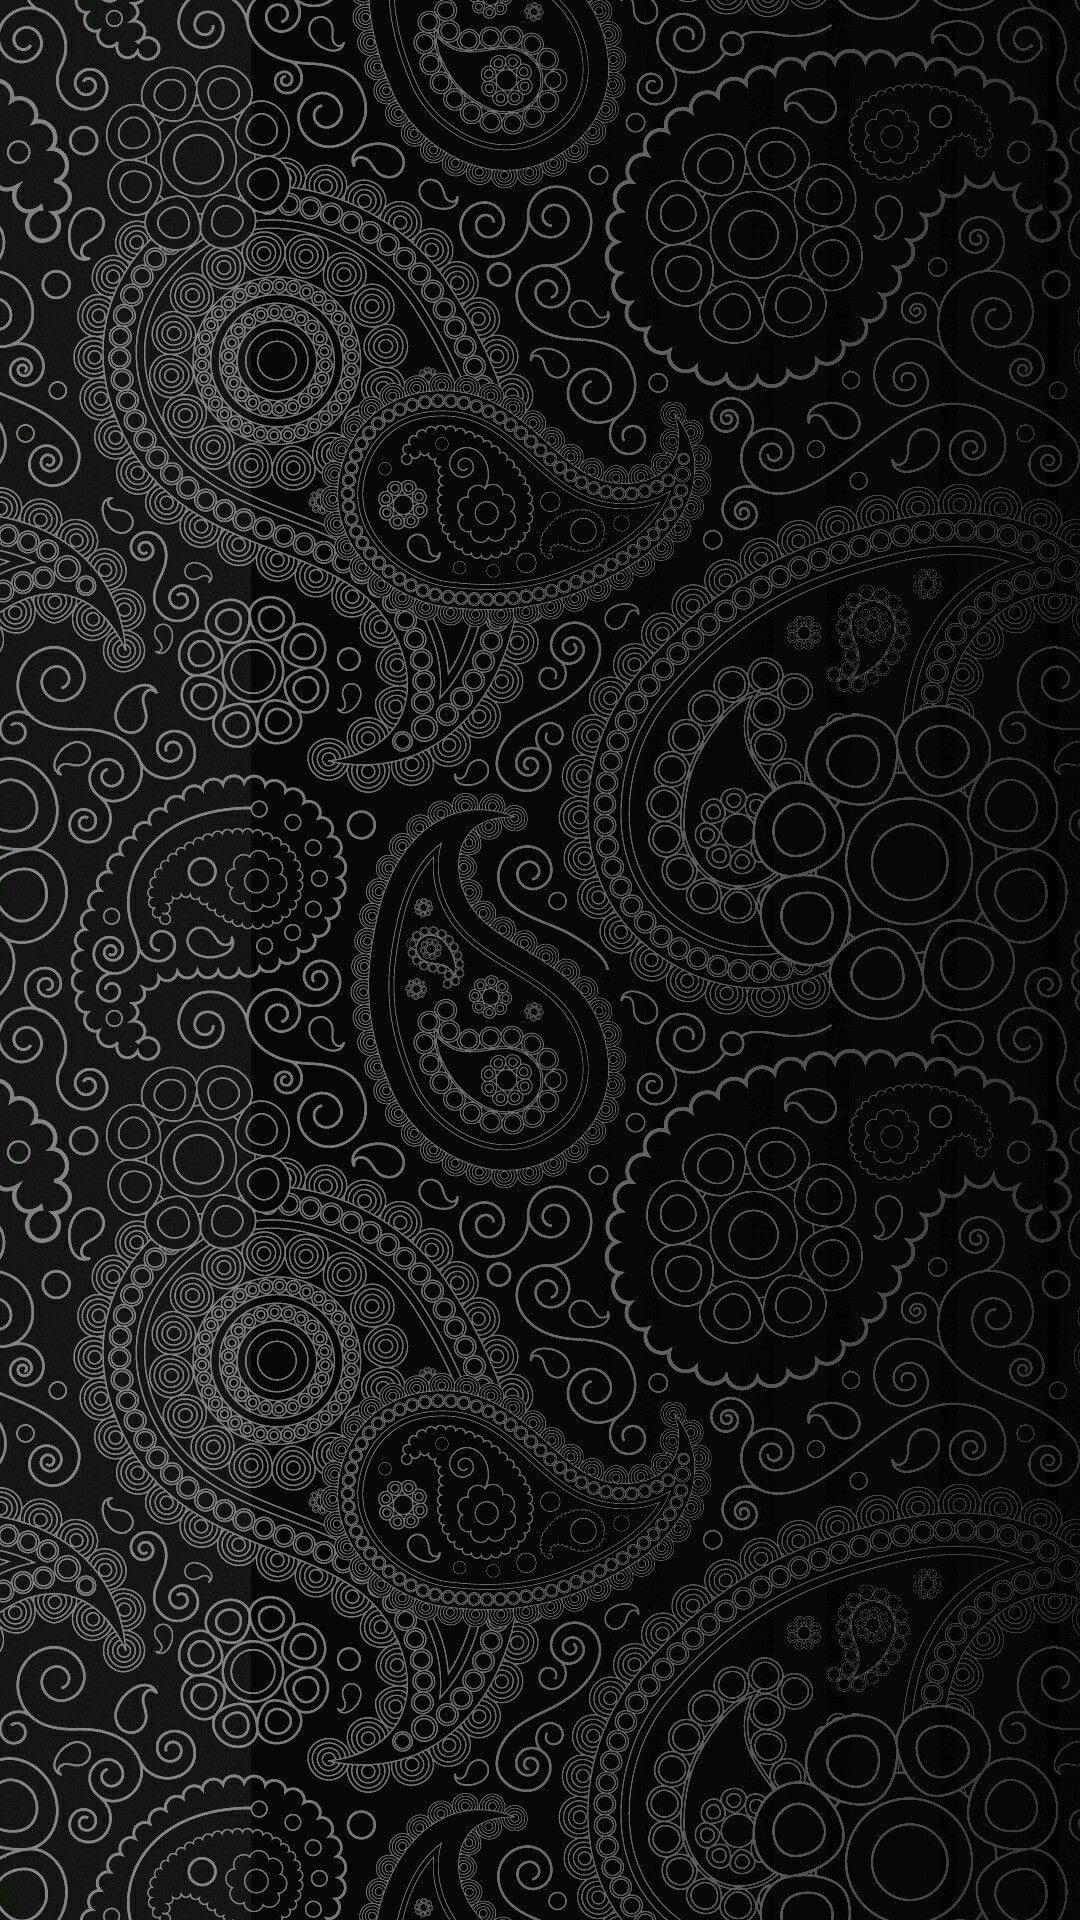 Floral Black Lace Iphone 4K Wallpapers - Wallpaper Cave